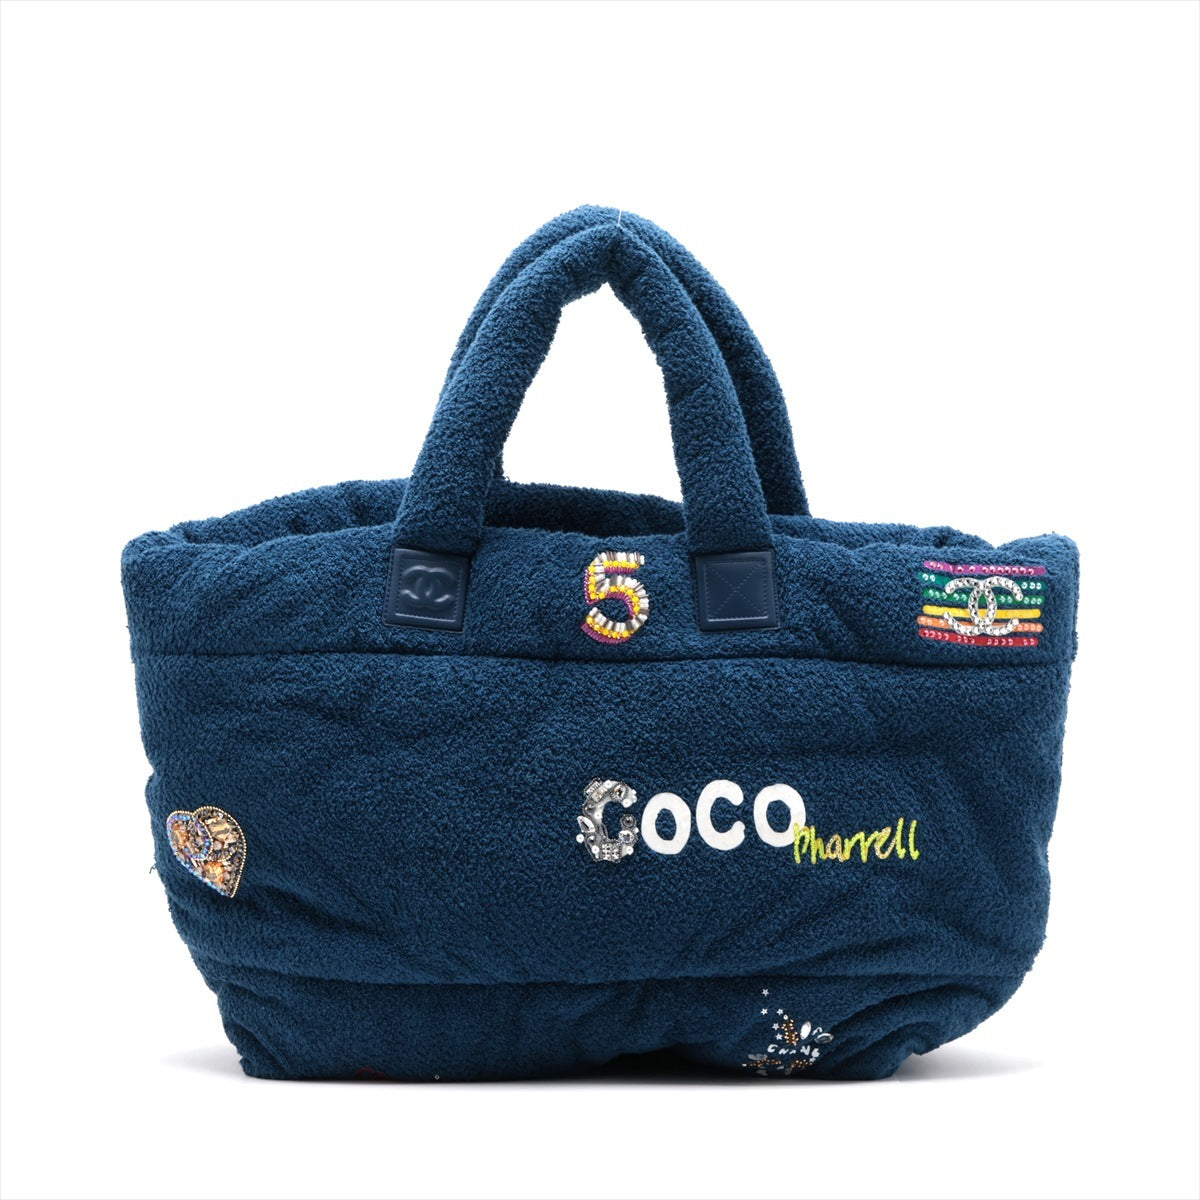 Chanel x Pharrell Williams Coco Cocoon Pile Tote bag Navy blue 27711376